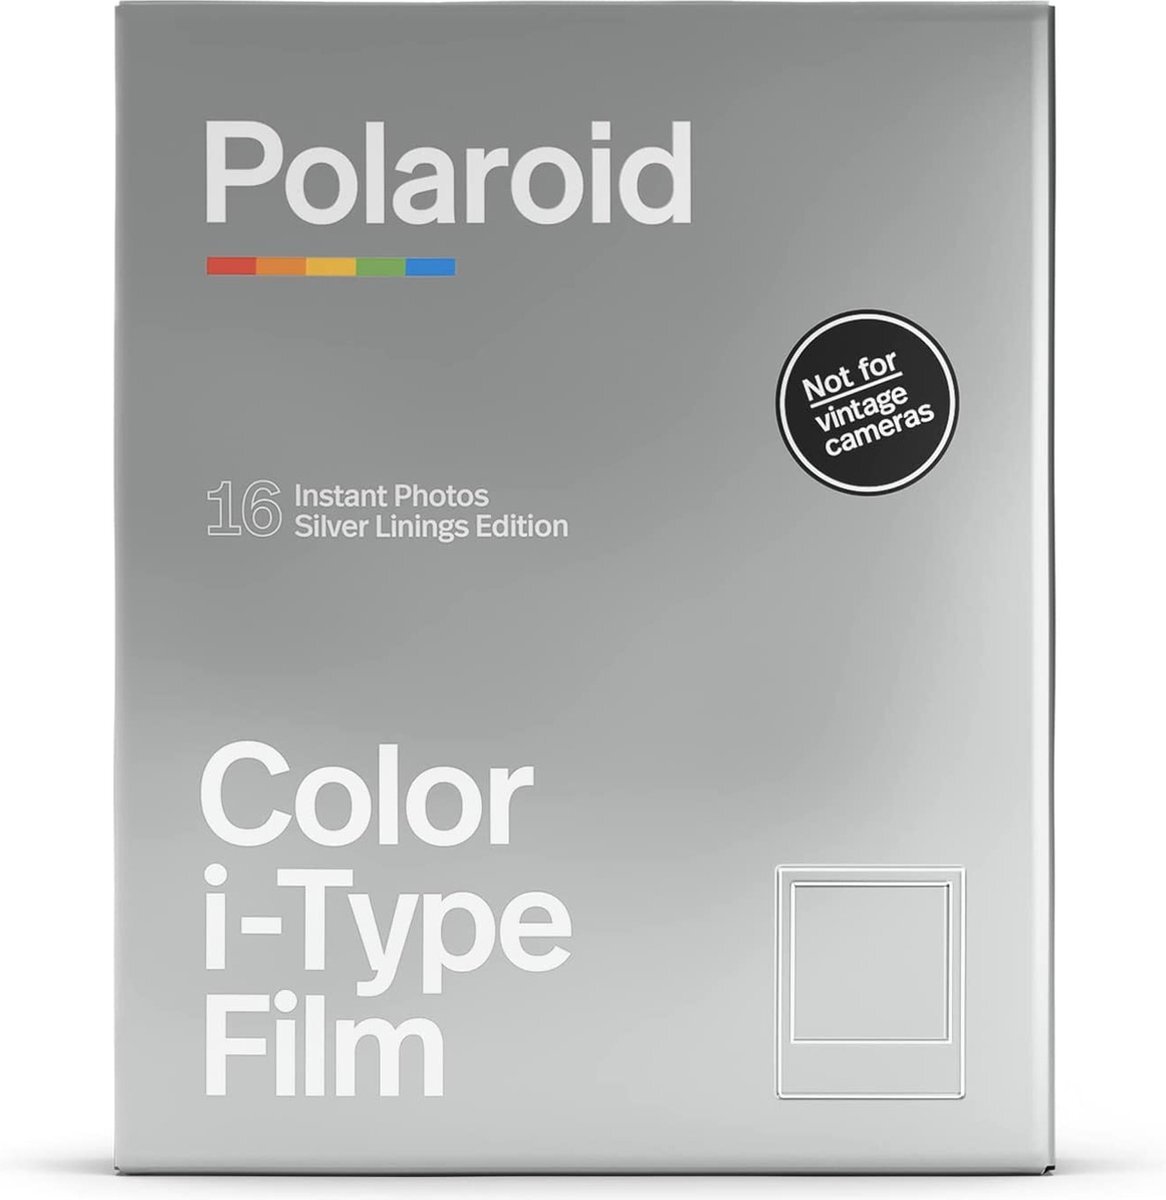 Polaroid Color i-Type Film Double Pack – Silver Linings edition - 2 x 8 stuks